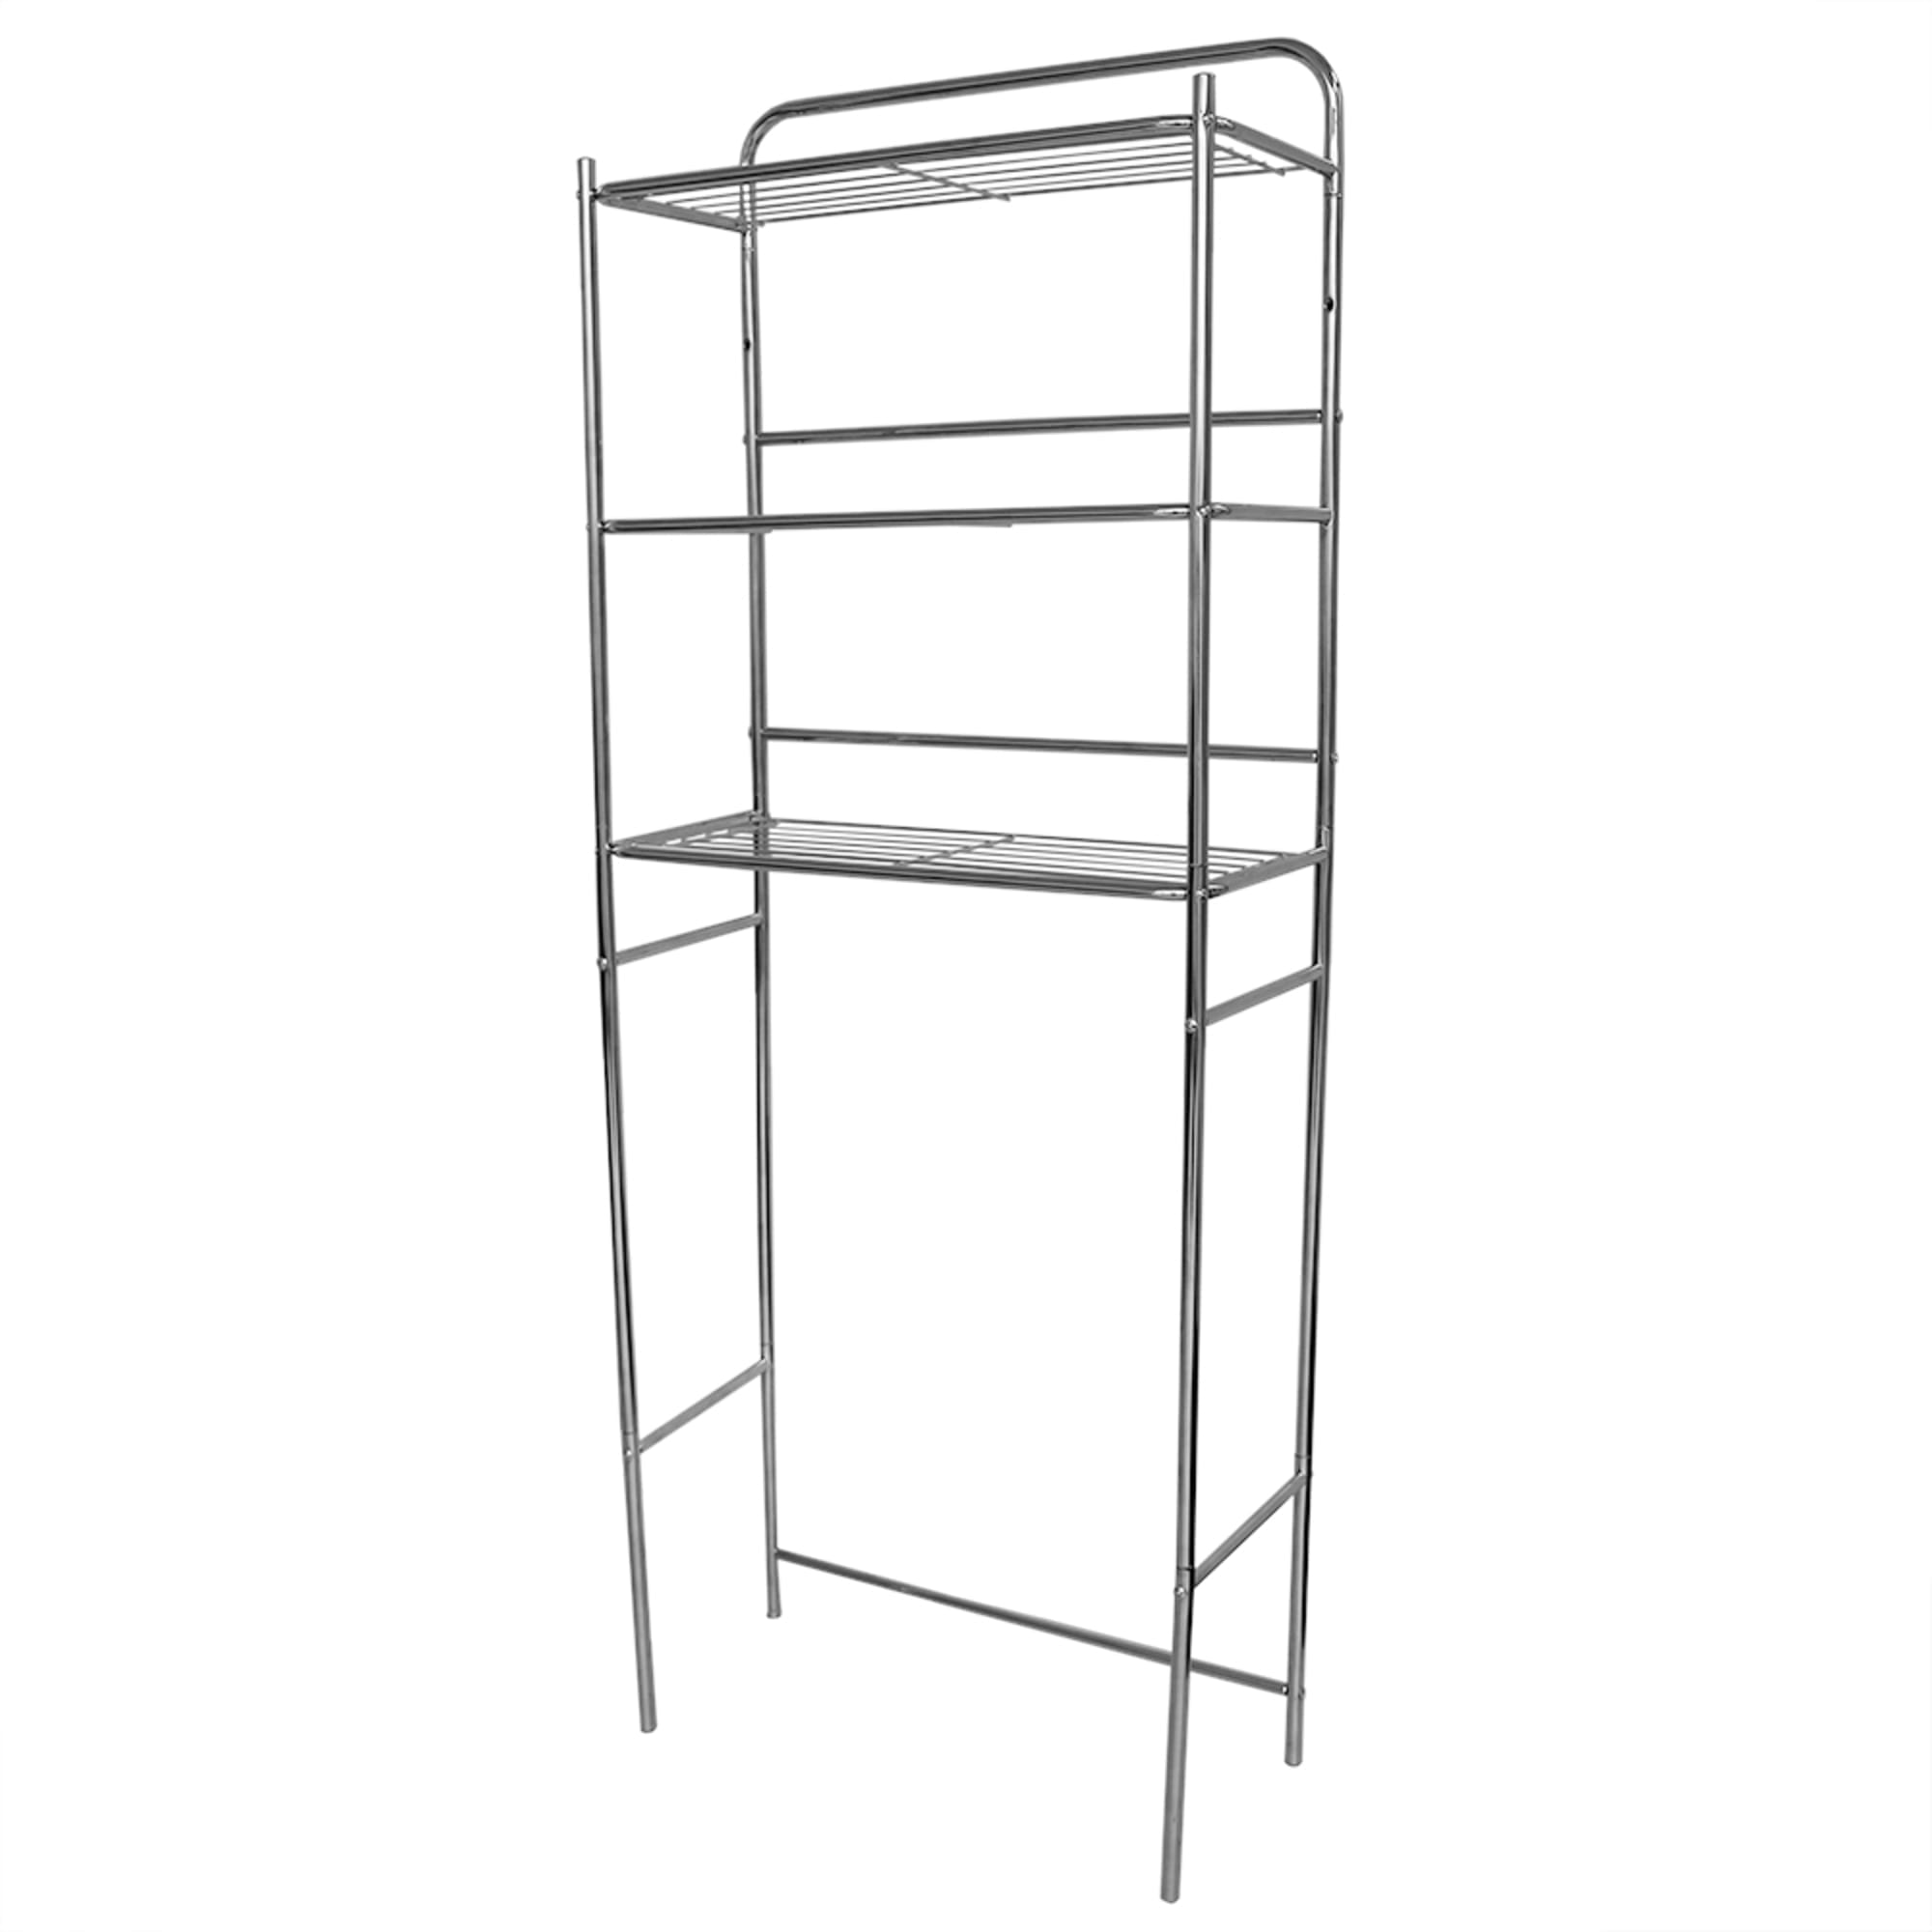 Home Basics 3 Tier  Steel Space Saver Over the Toilet Bathroom Shelf with Open Shelving, Chrome $25.00 EACH, CASE PACK OF 6